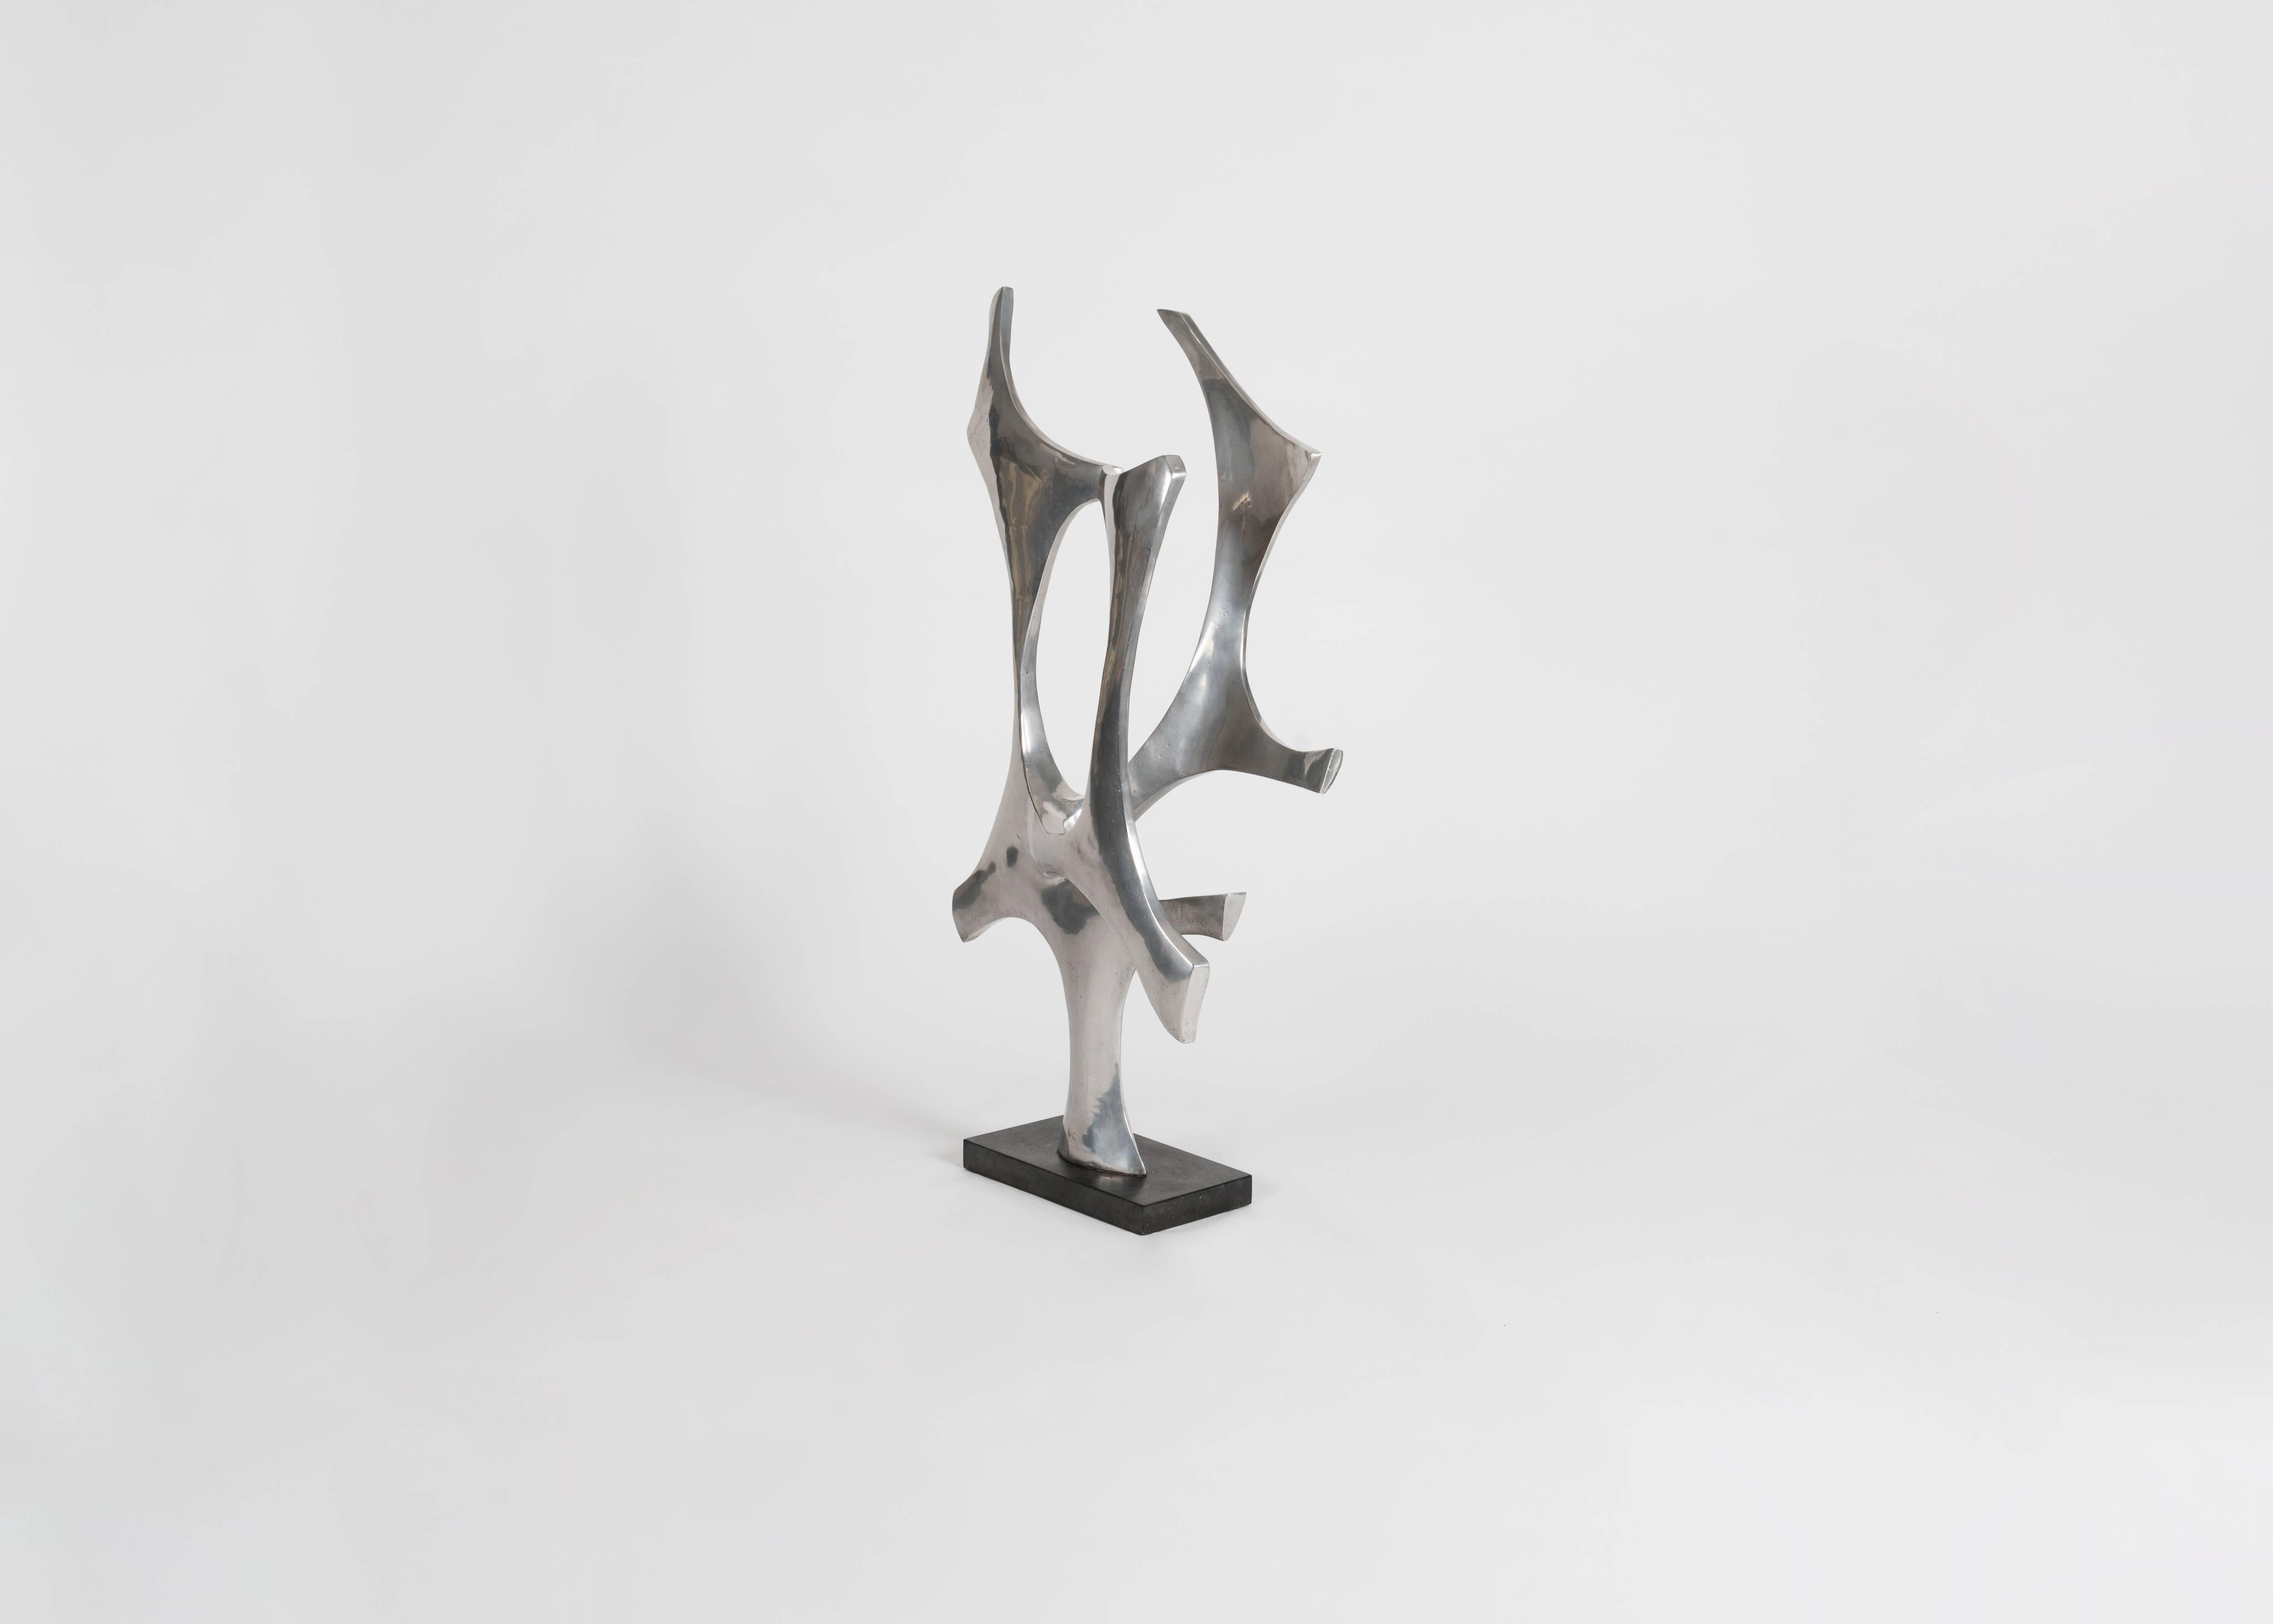 This piece in polished aluminum, elevated on a rectangular, black pedestal, by Fred Brouard, illustrious and groundbreaking French sculpture and furniture maker of the mid-to-late twentieth century, is singular and remarkable for its size and